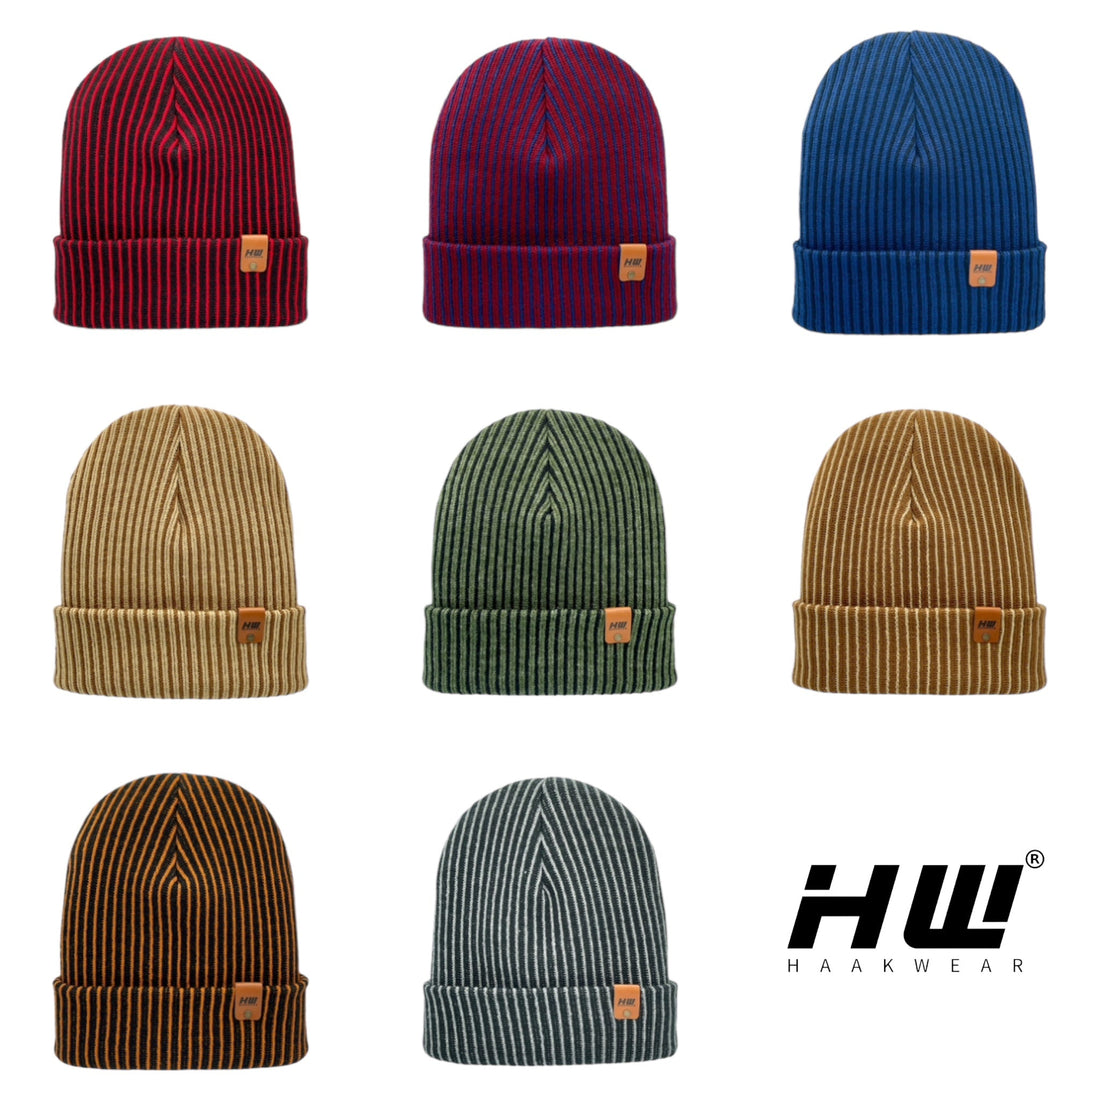 New collection of beanies just lunched by HAAKWEAR. - HAAKWEAR